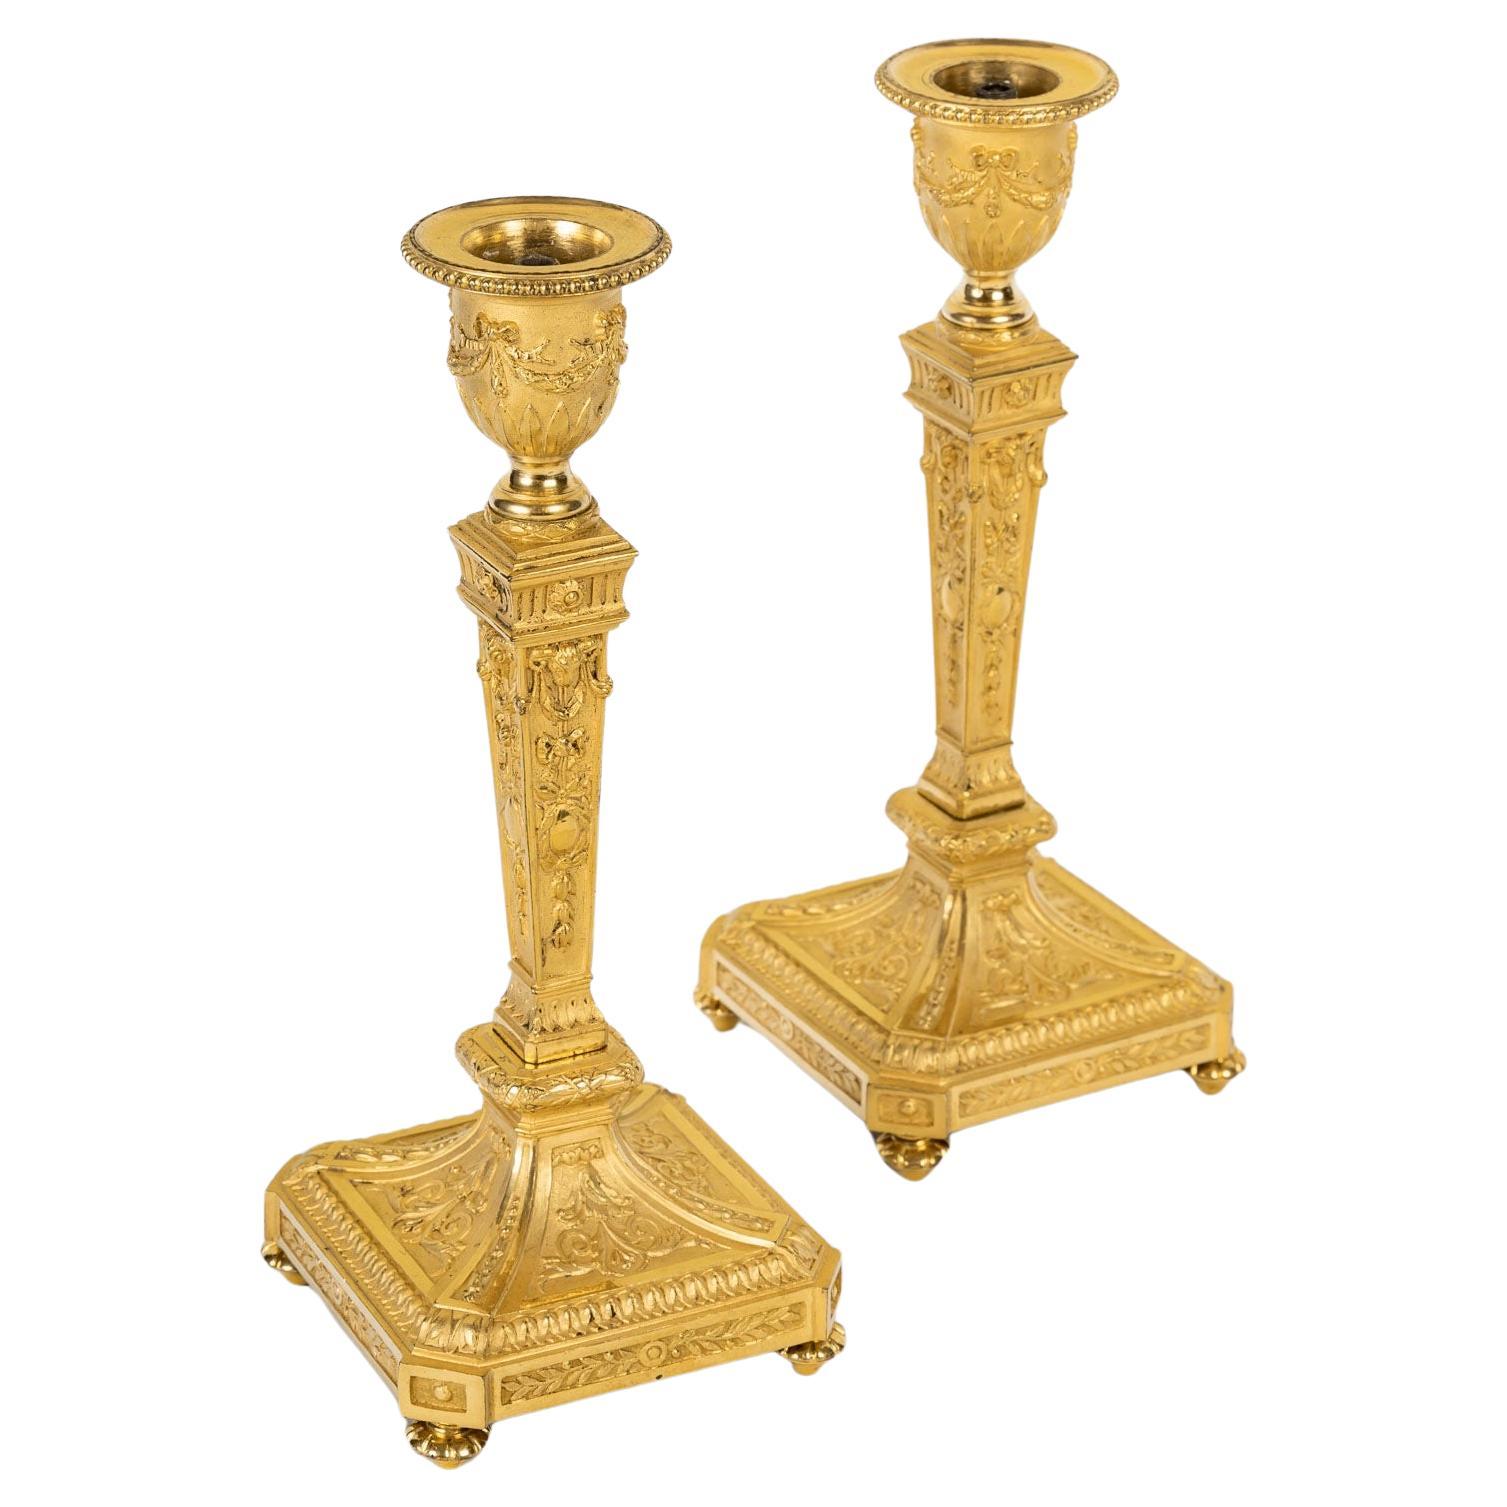 A Very Fine Quality 19th Century French Pair of Candlesticks For Sale